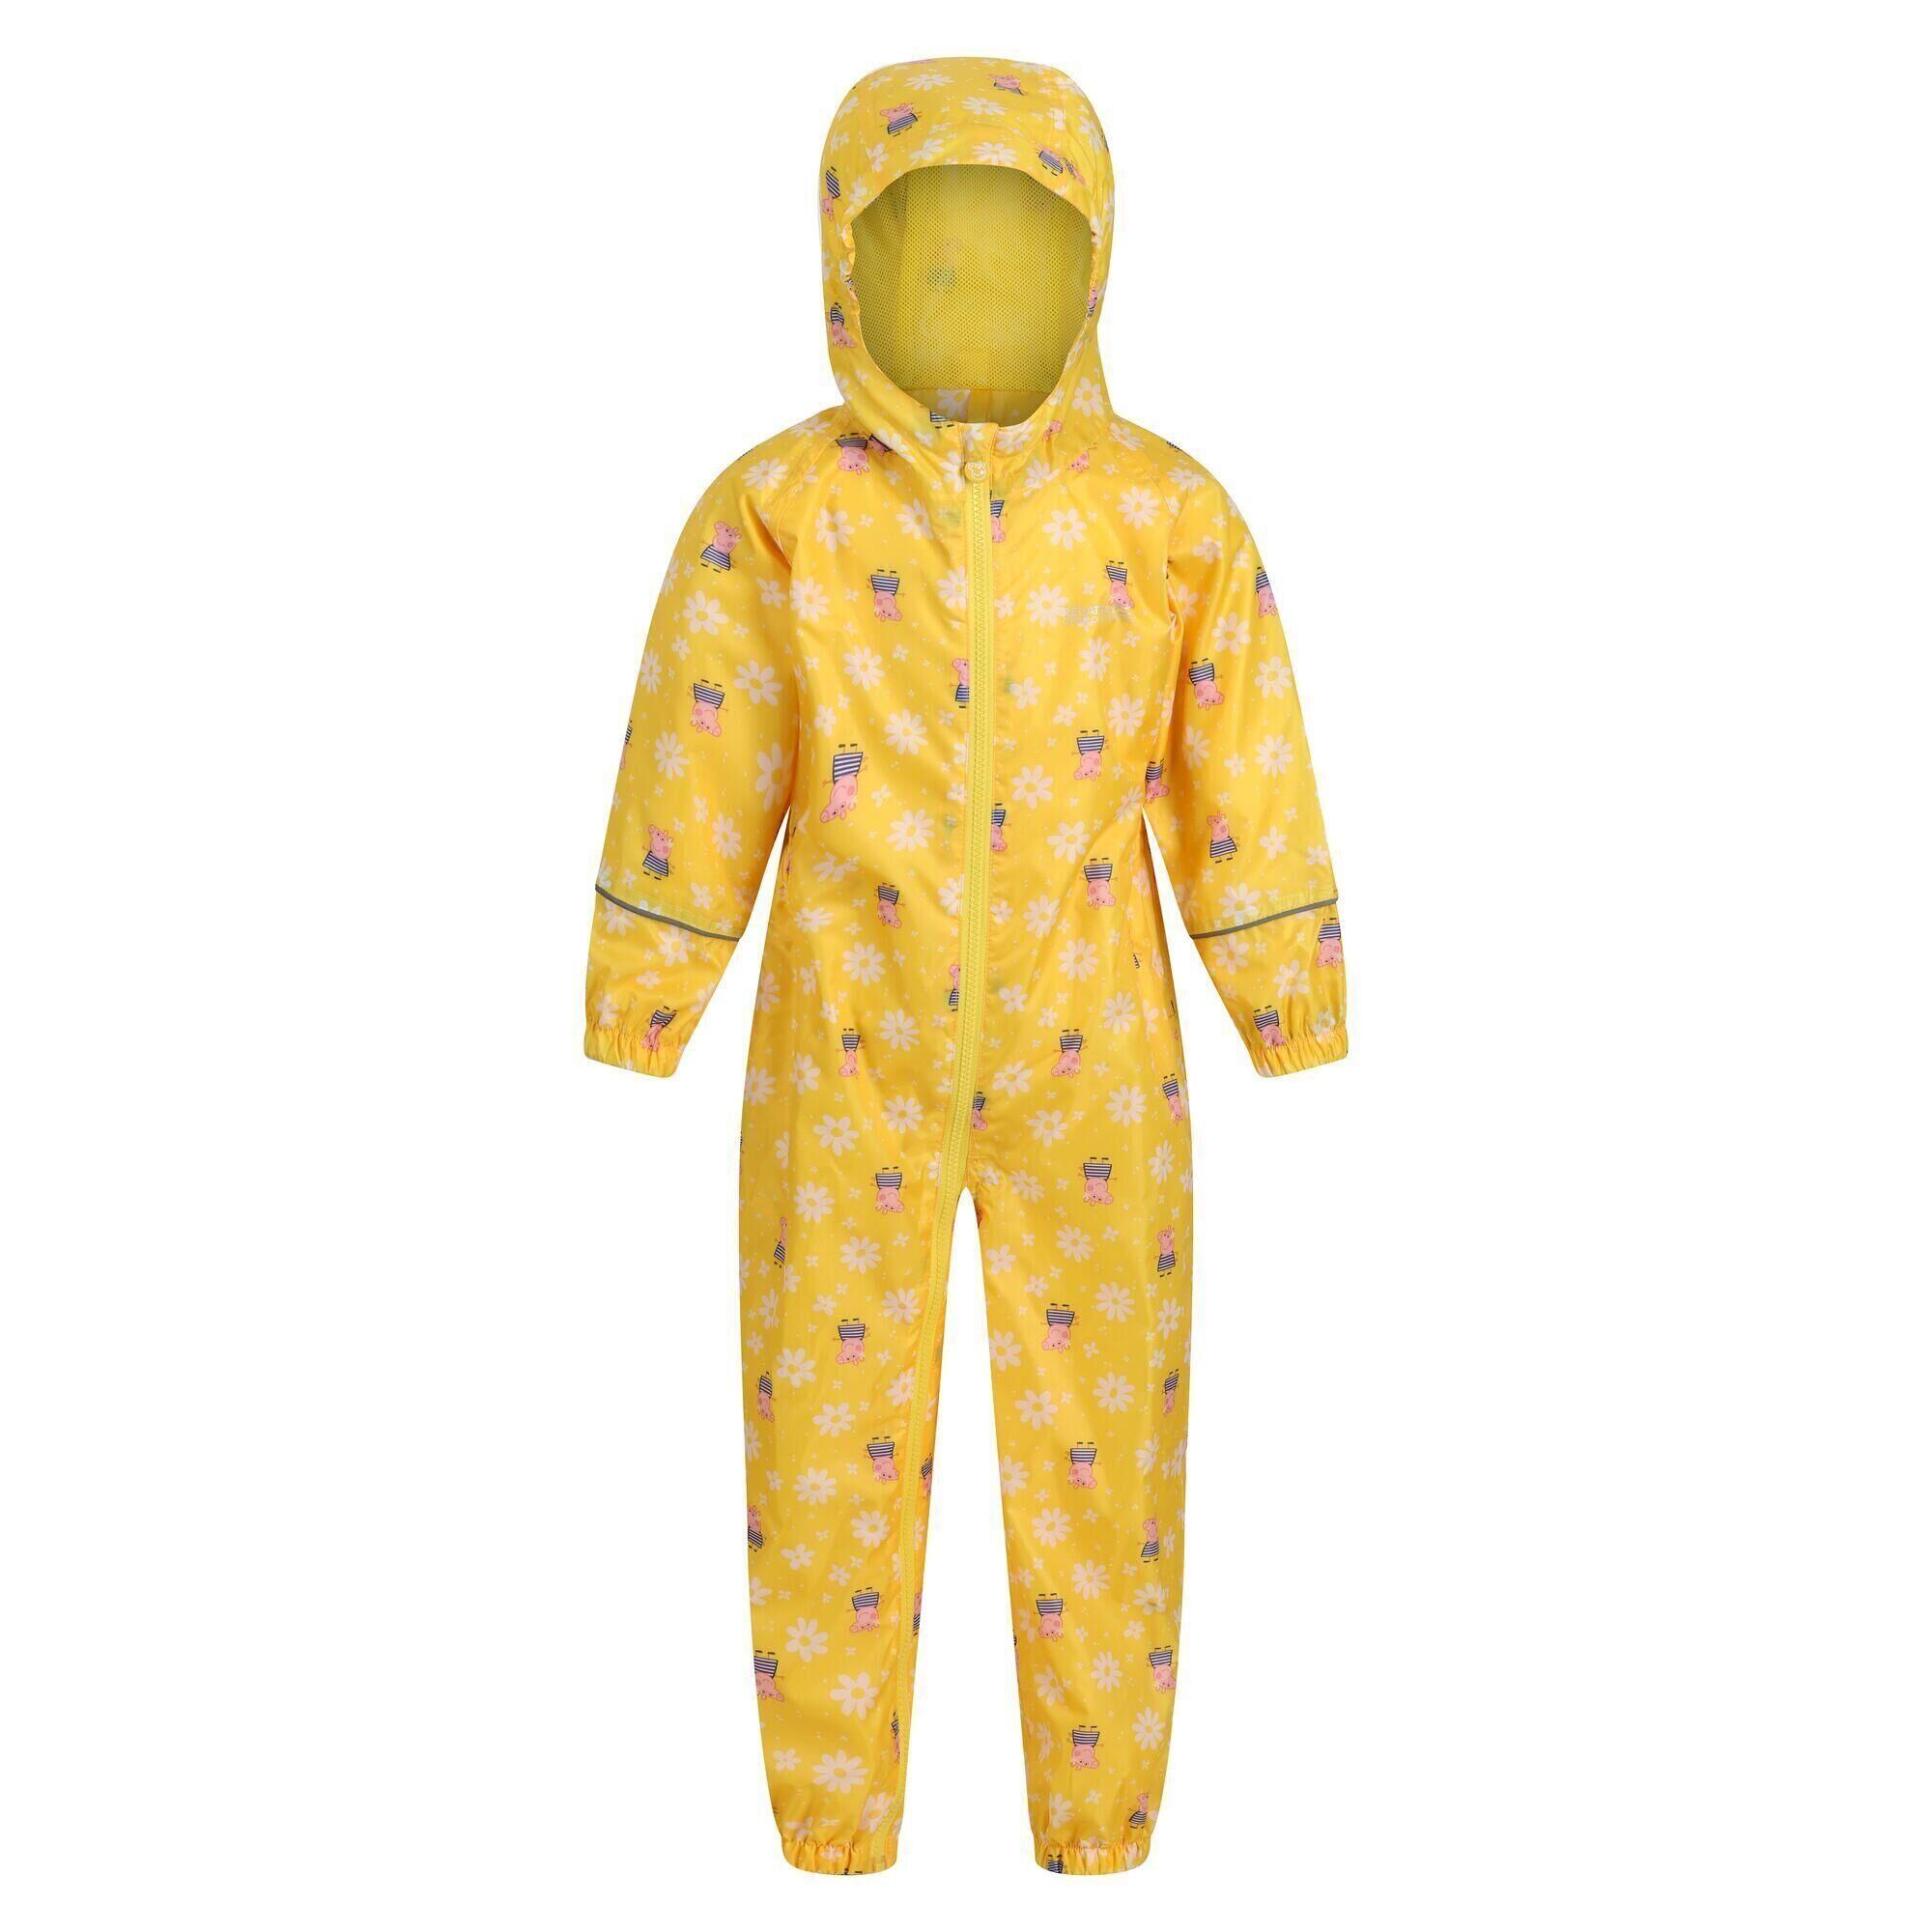 REGATTA Childrens/Kids Pobble Peppa Pig Floral Waterproof Puddle Suit (Maize Yellow)